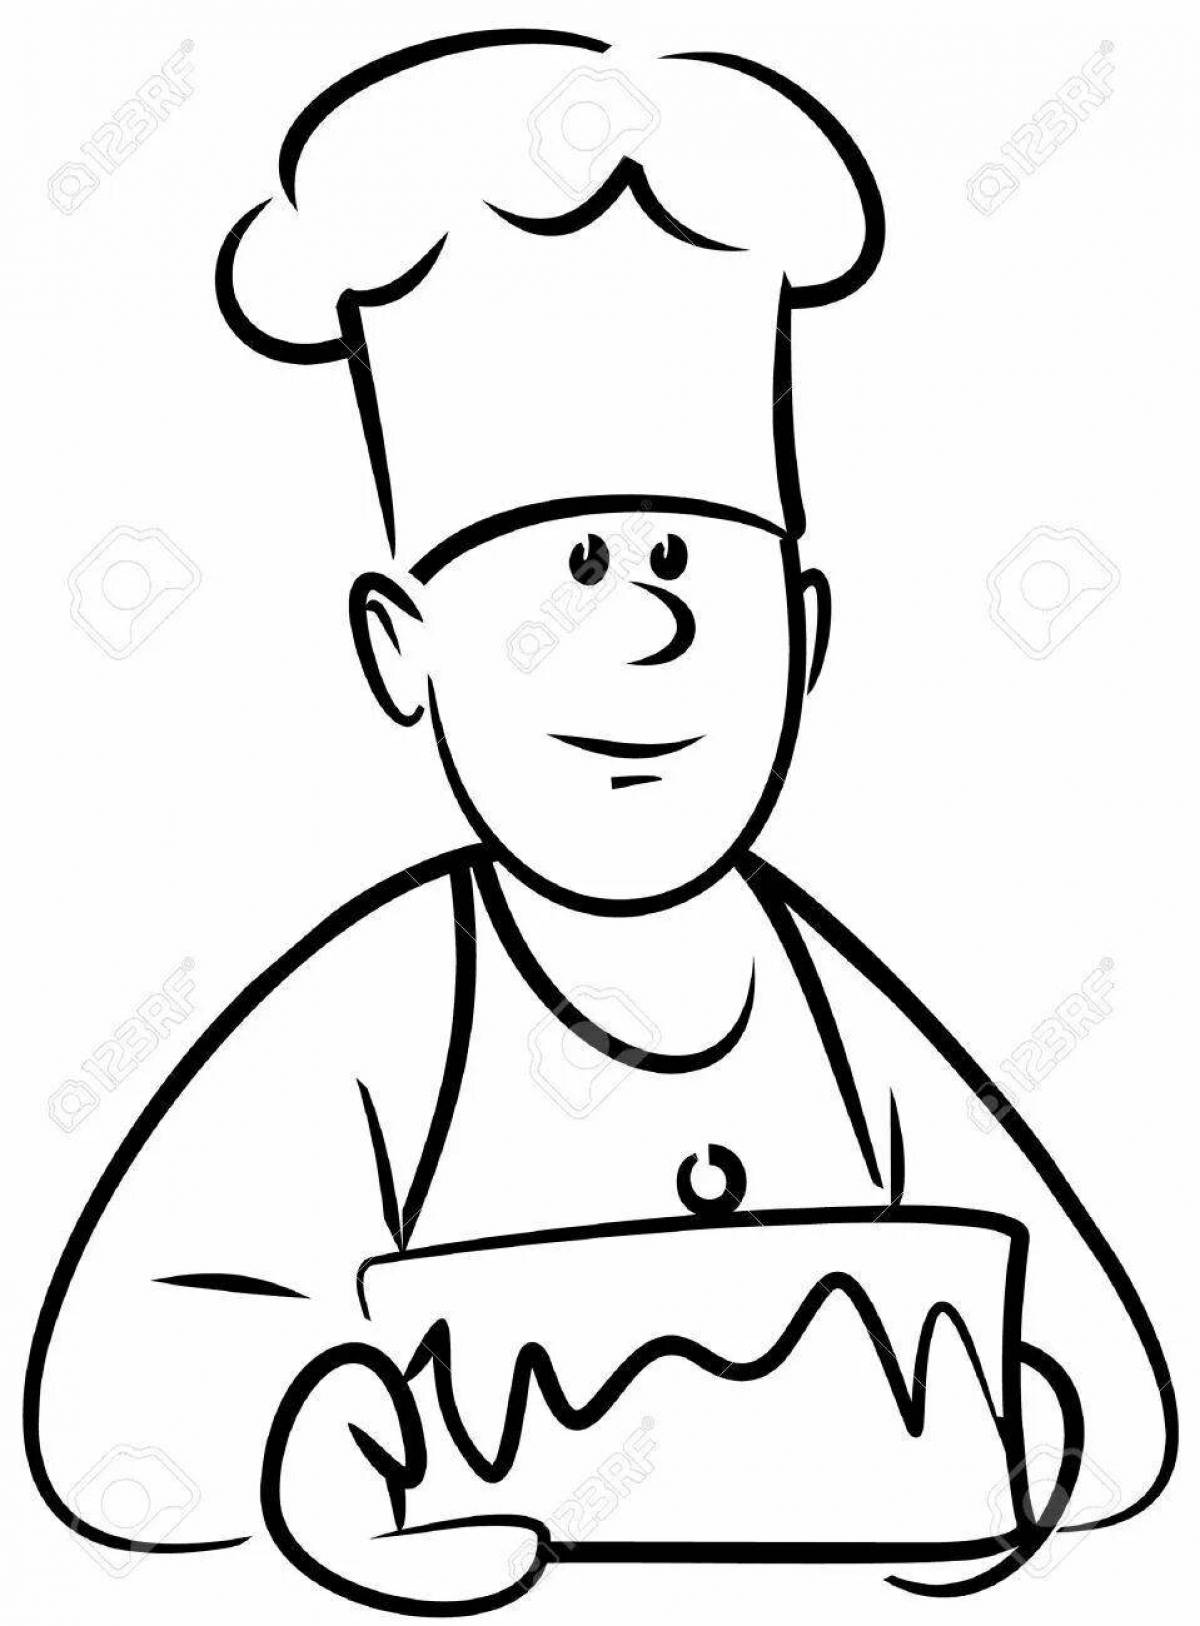 Coloring page cheerful confectioner